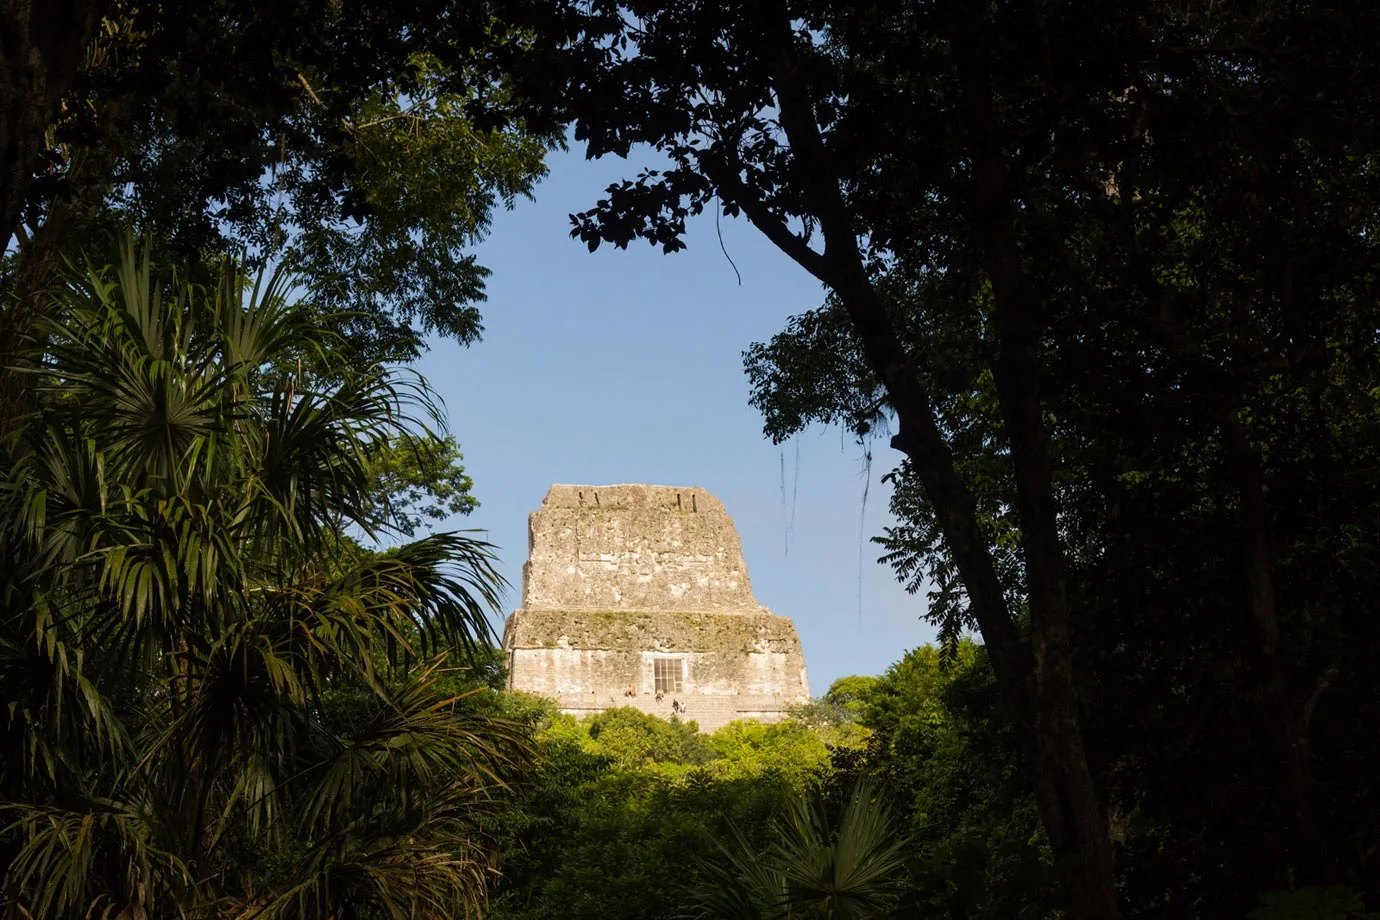 In 1979, Tikal National Park was declared a UNESCO World Heritage site, and walking around it is extremely easy to understand why